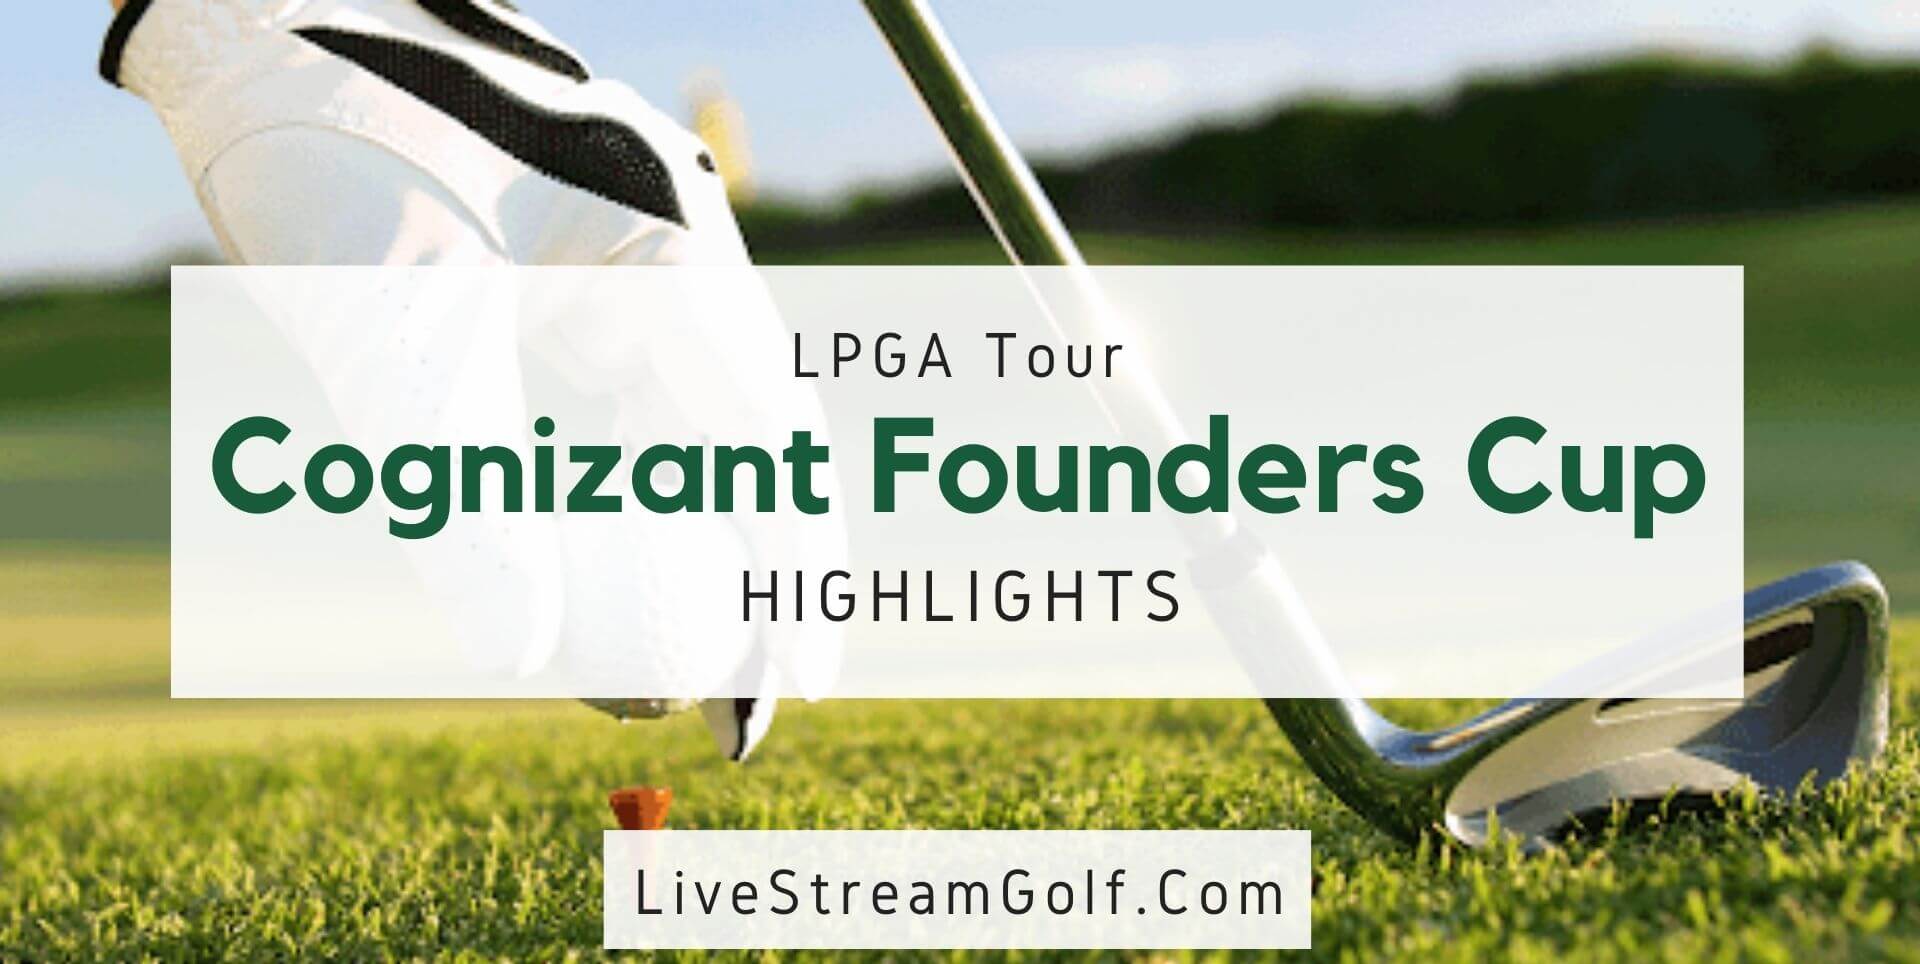 Cognizant Founders Cup Rd 3 Highlights LPGA 2021